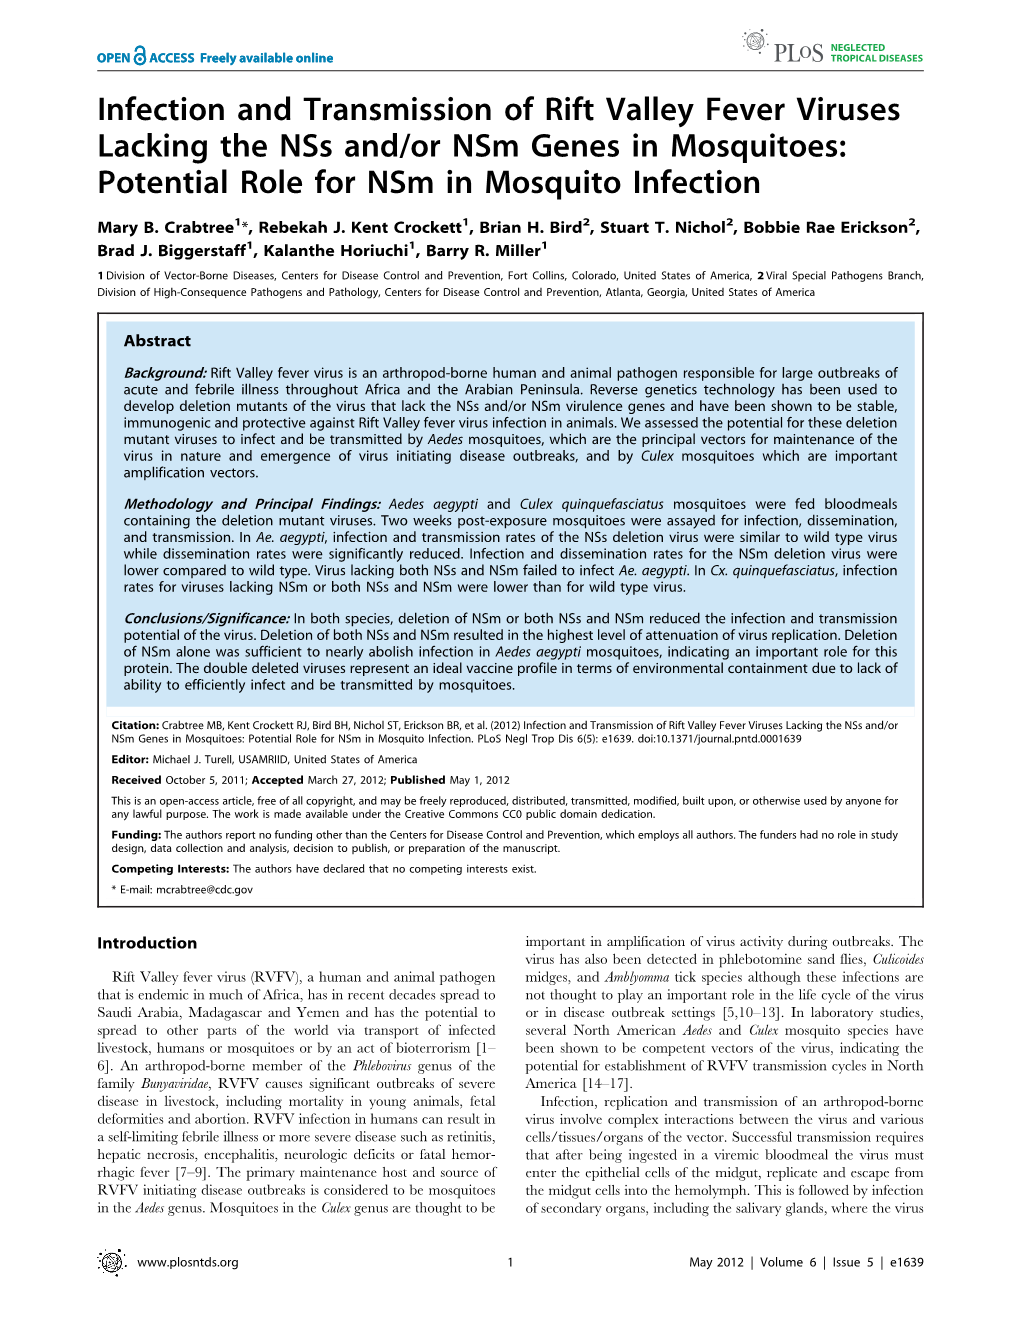 Potential Role for Nsm in Mosquito Infection